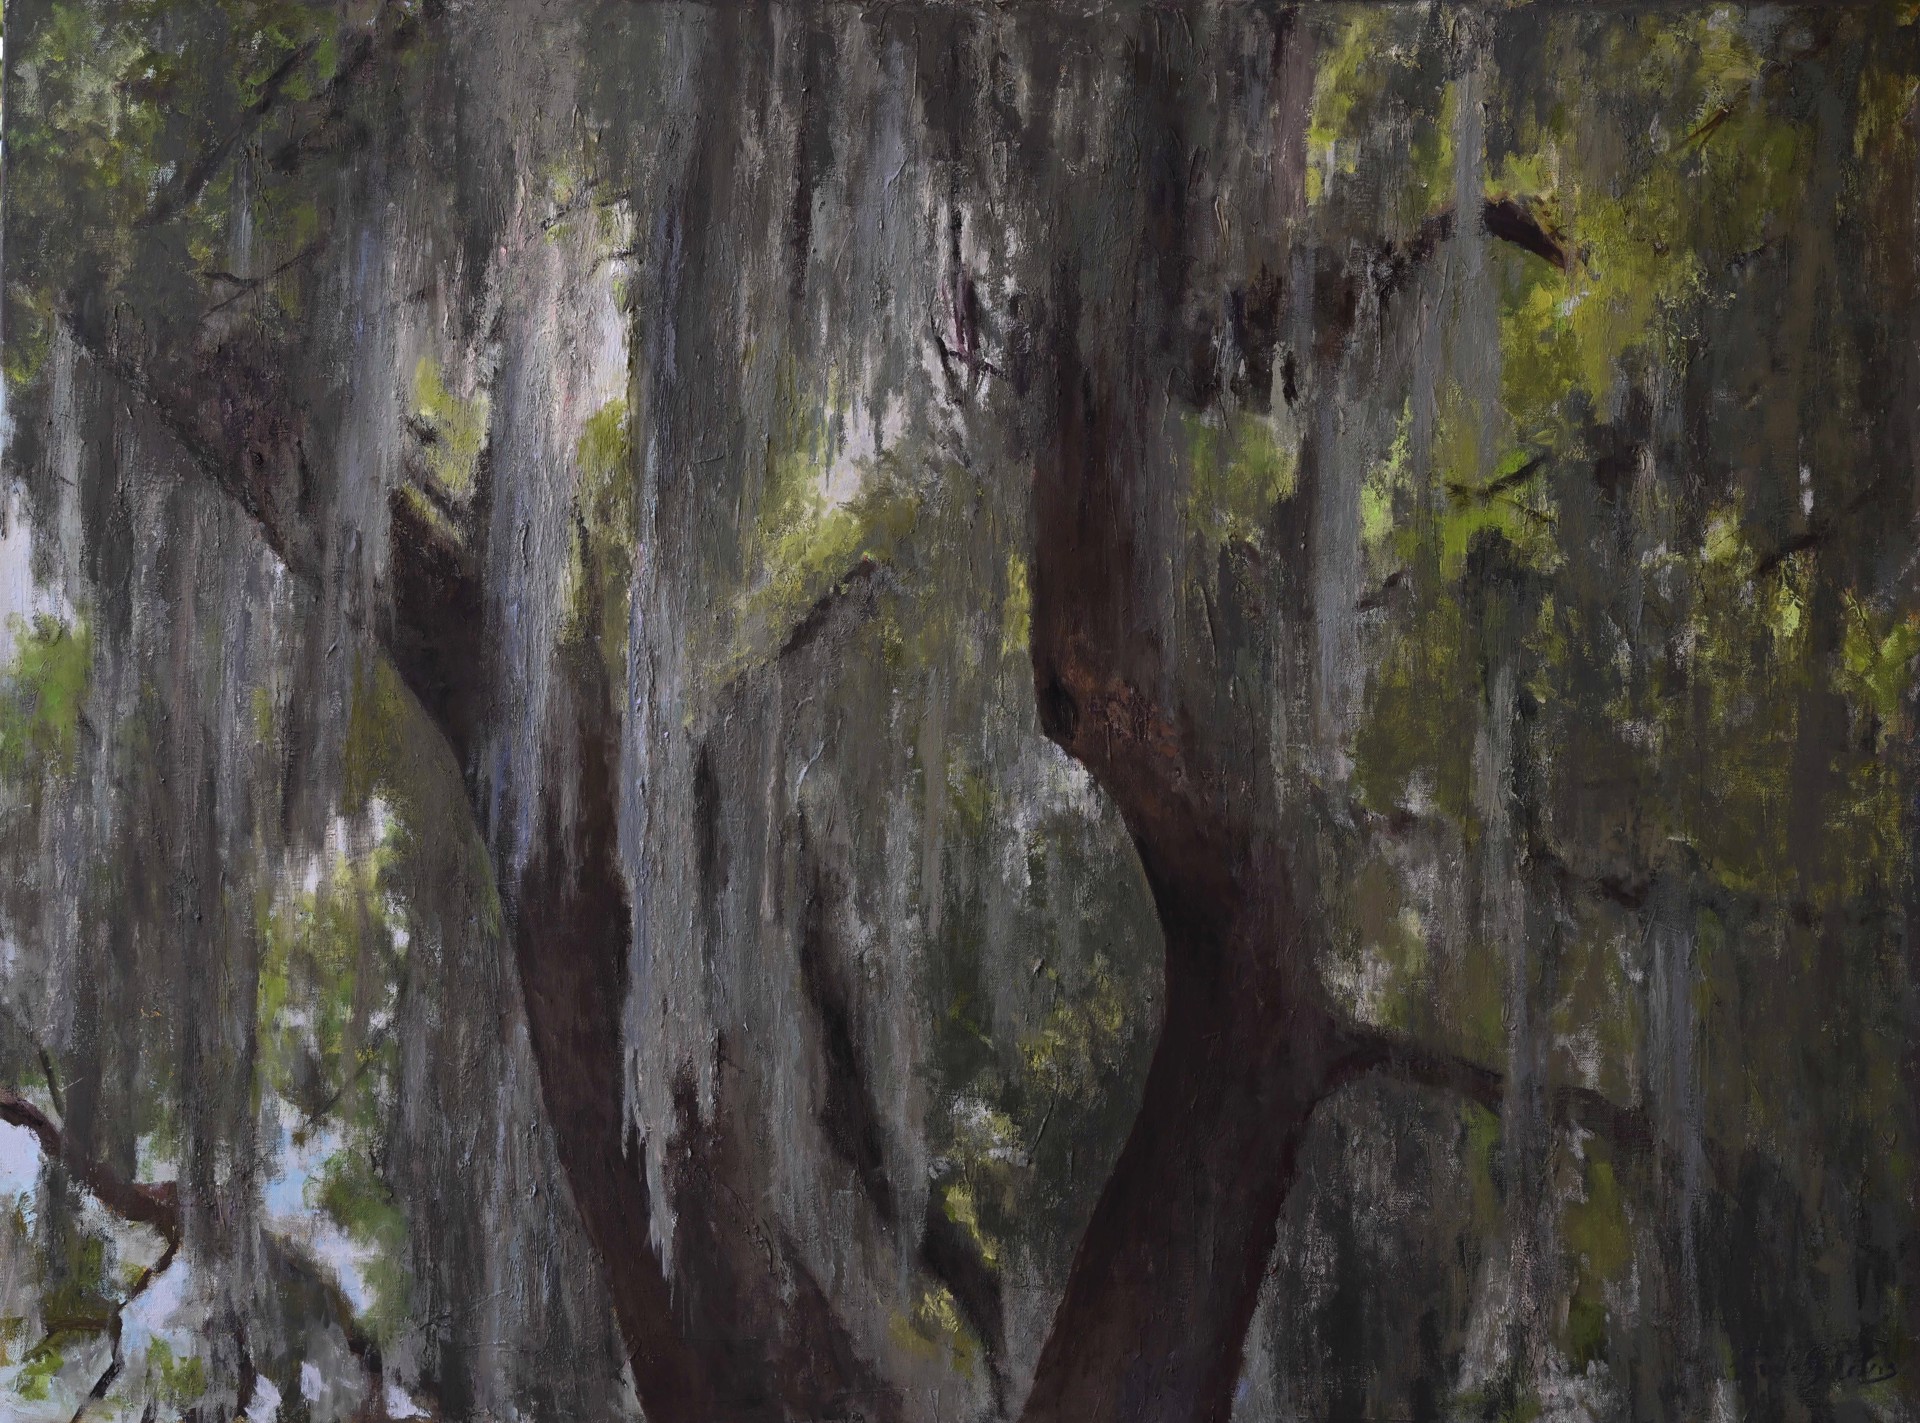 Ode to Spanish Moss by Linda Peters